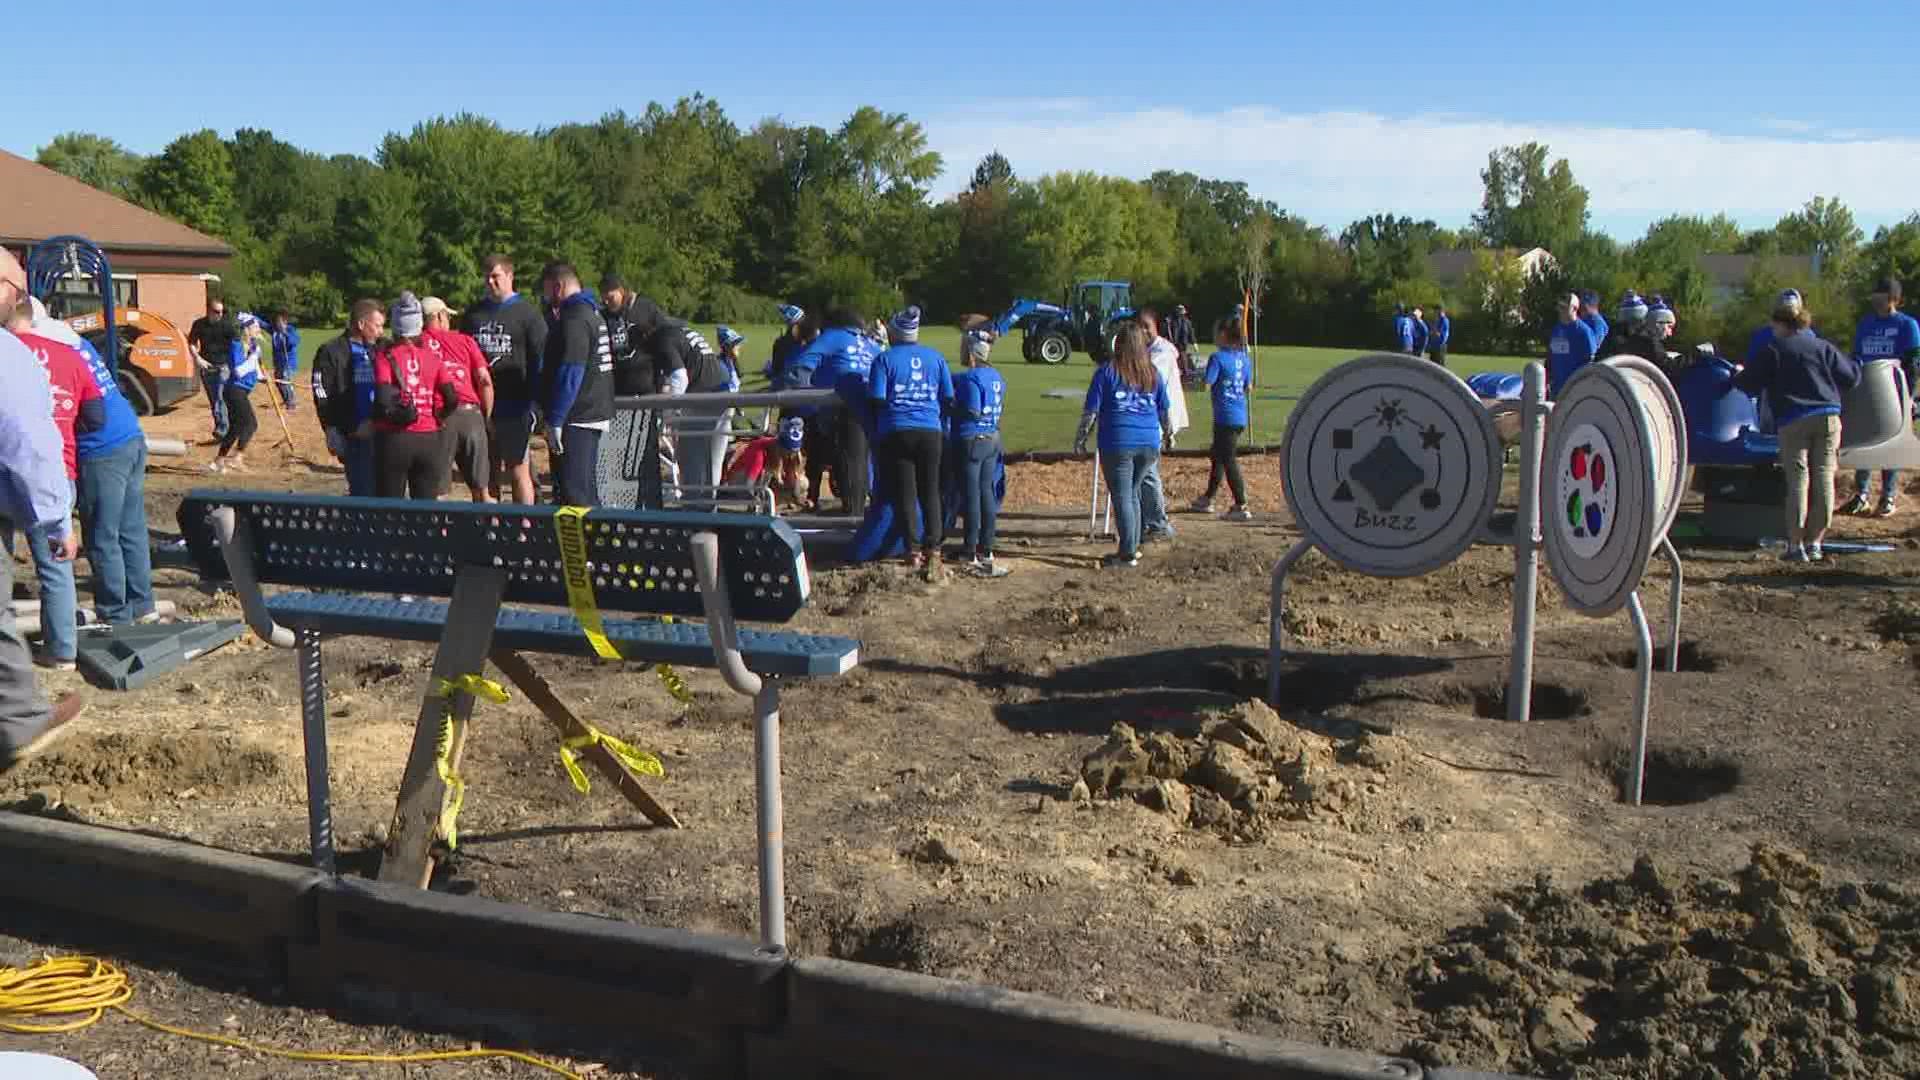 The project started around 9 a.m. at Deer Run Elementary School in Pike Township.